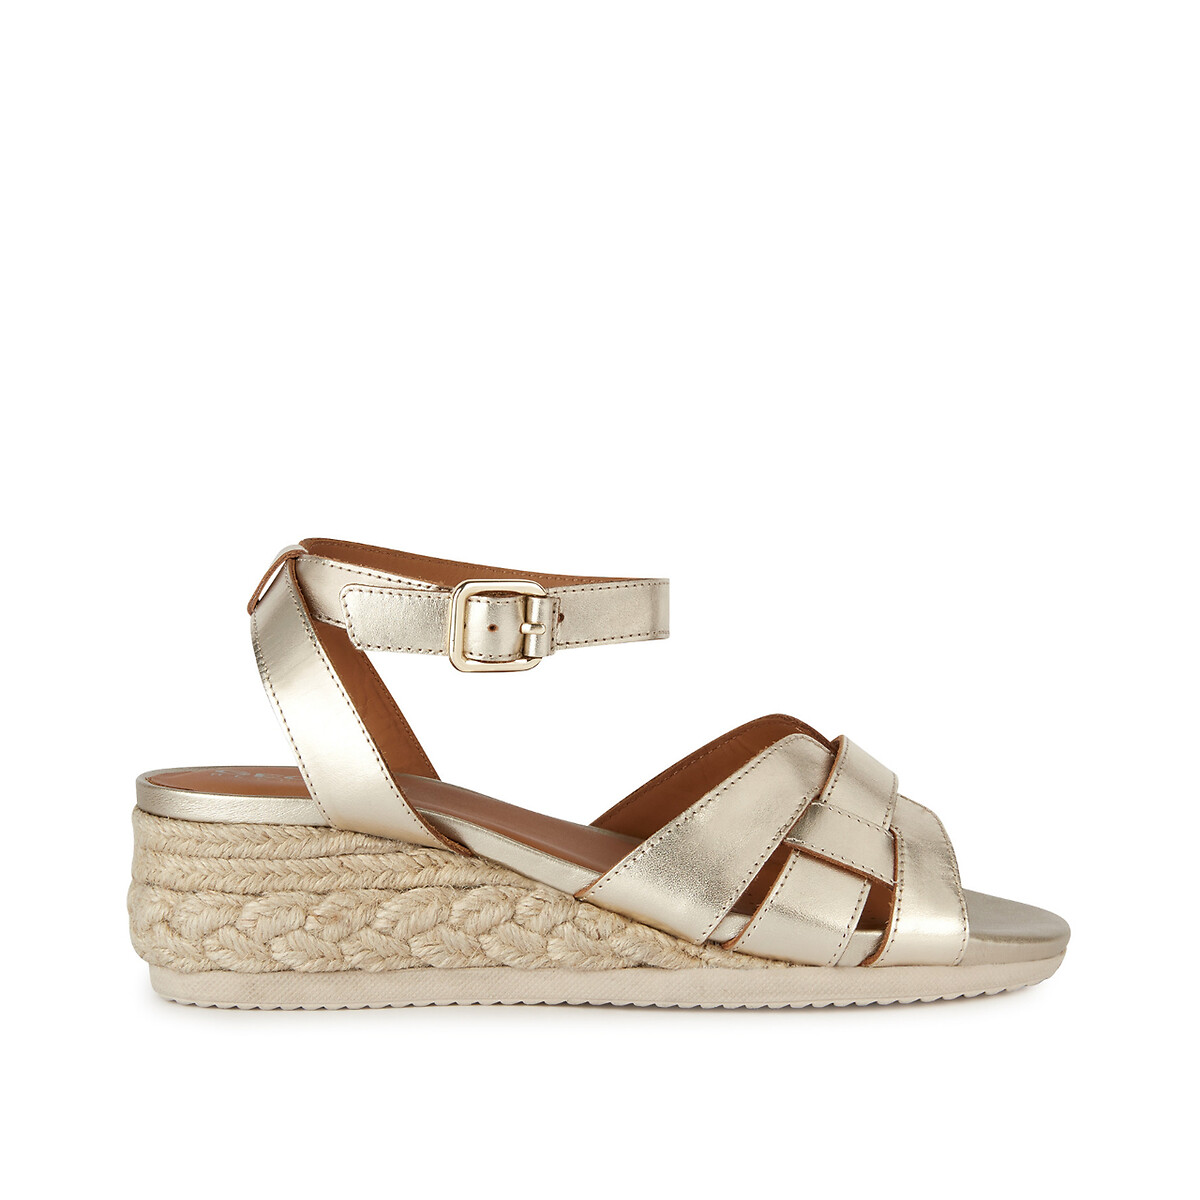 Ischia corda breathable wedge sandals in leather, gold-coloured, Geox ...